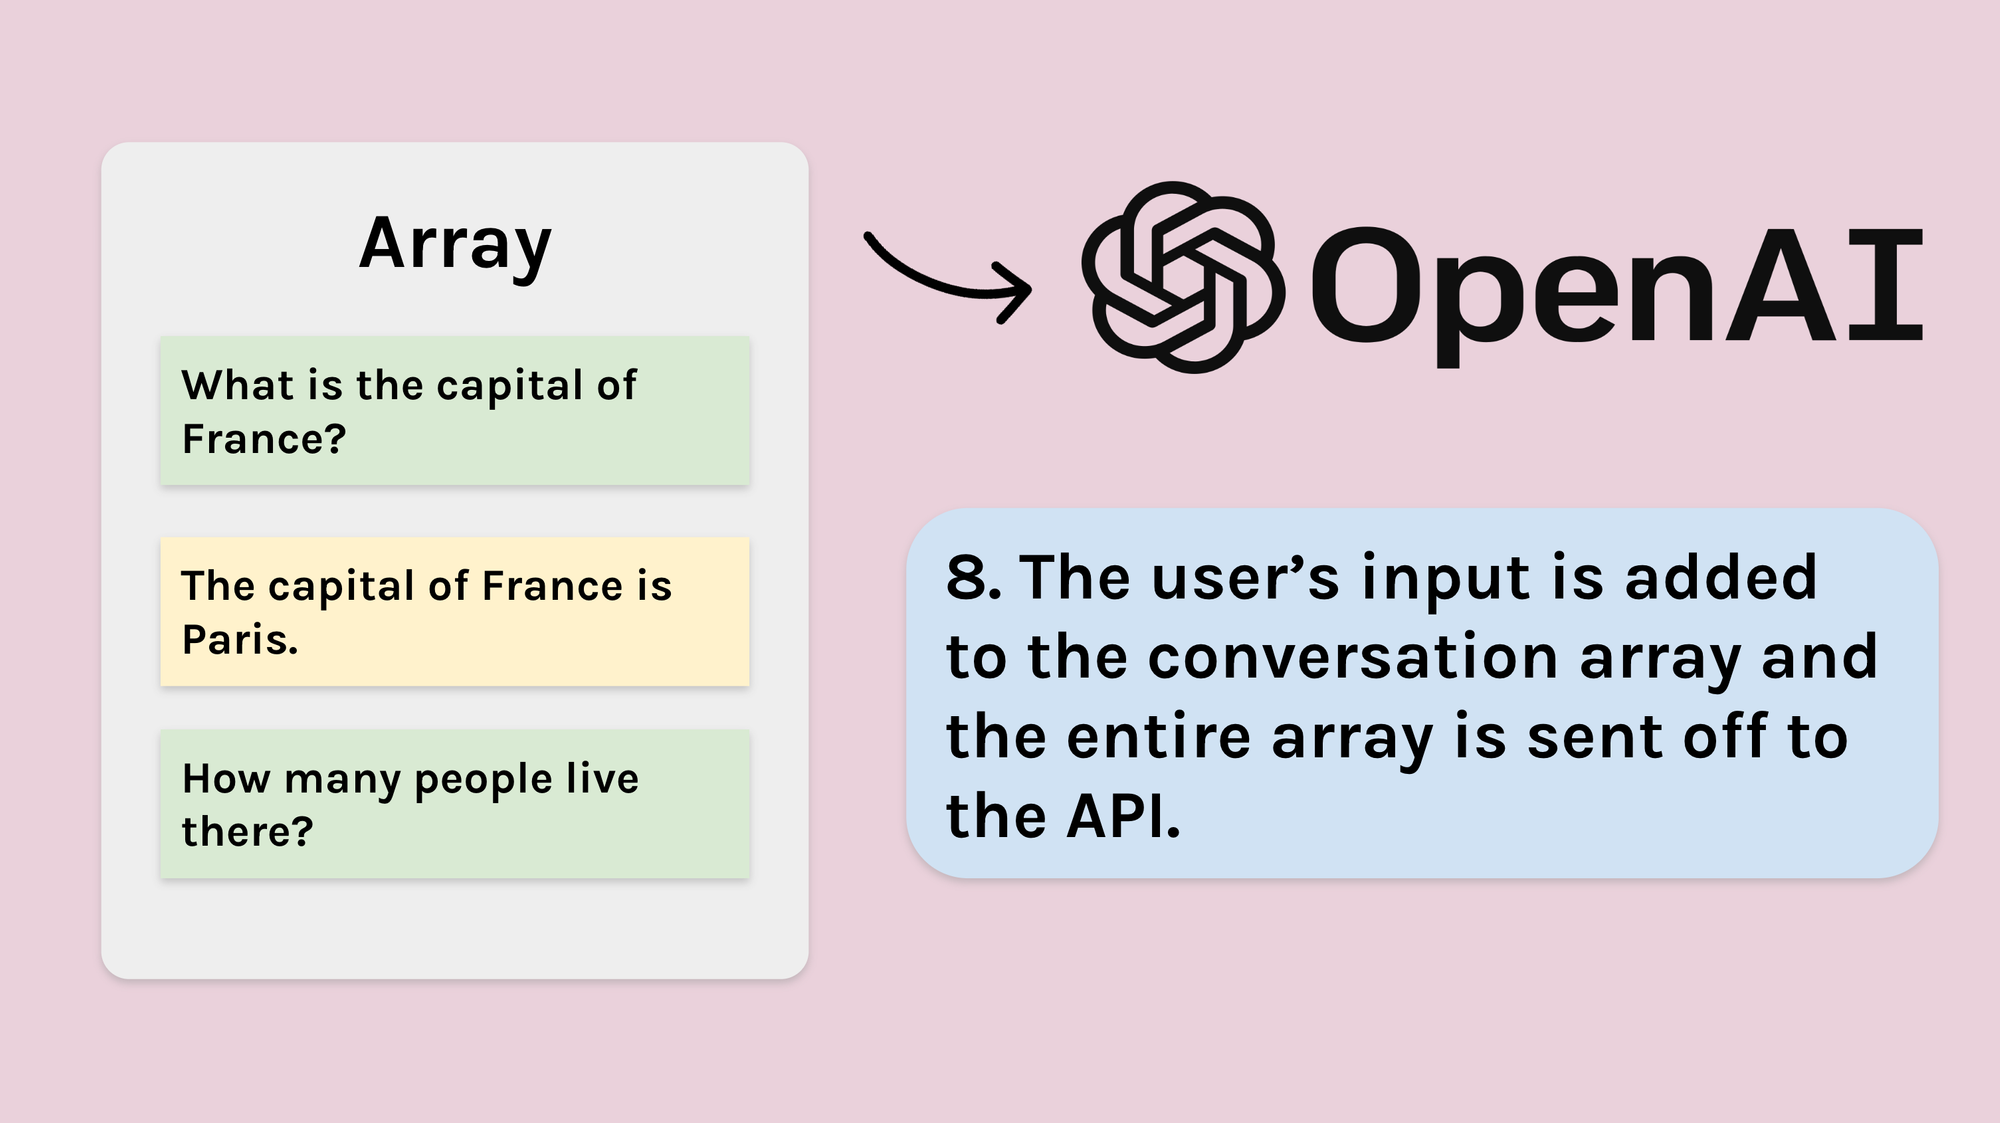 8. The user’s input is added to the conversation array and the entire array is sent off to the API.